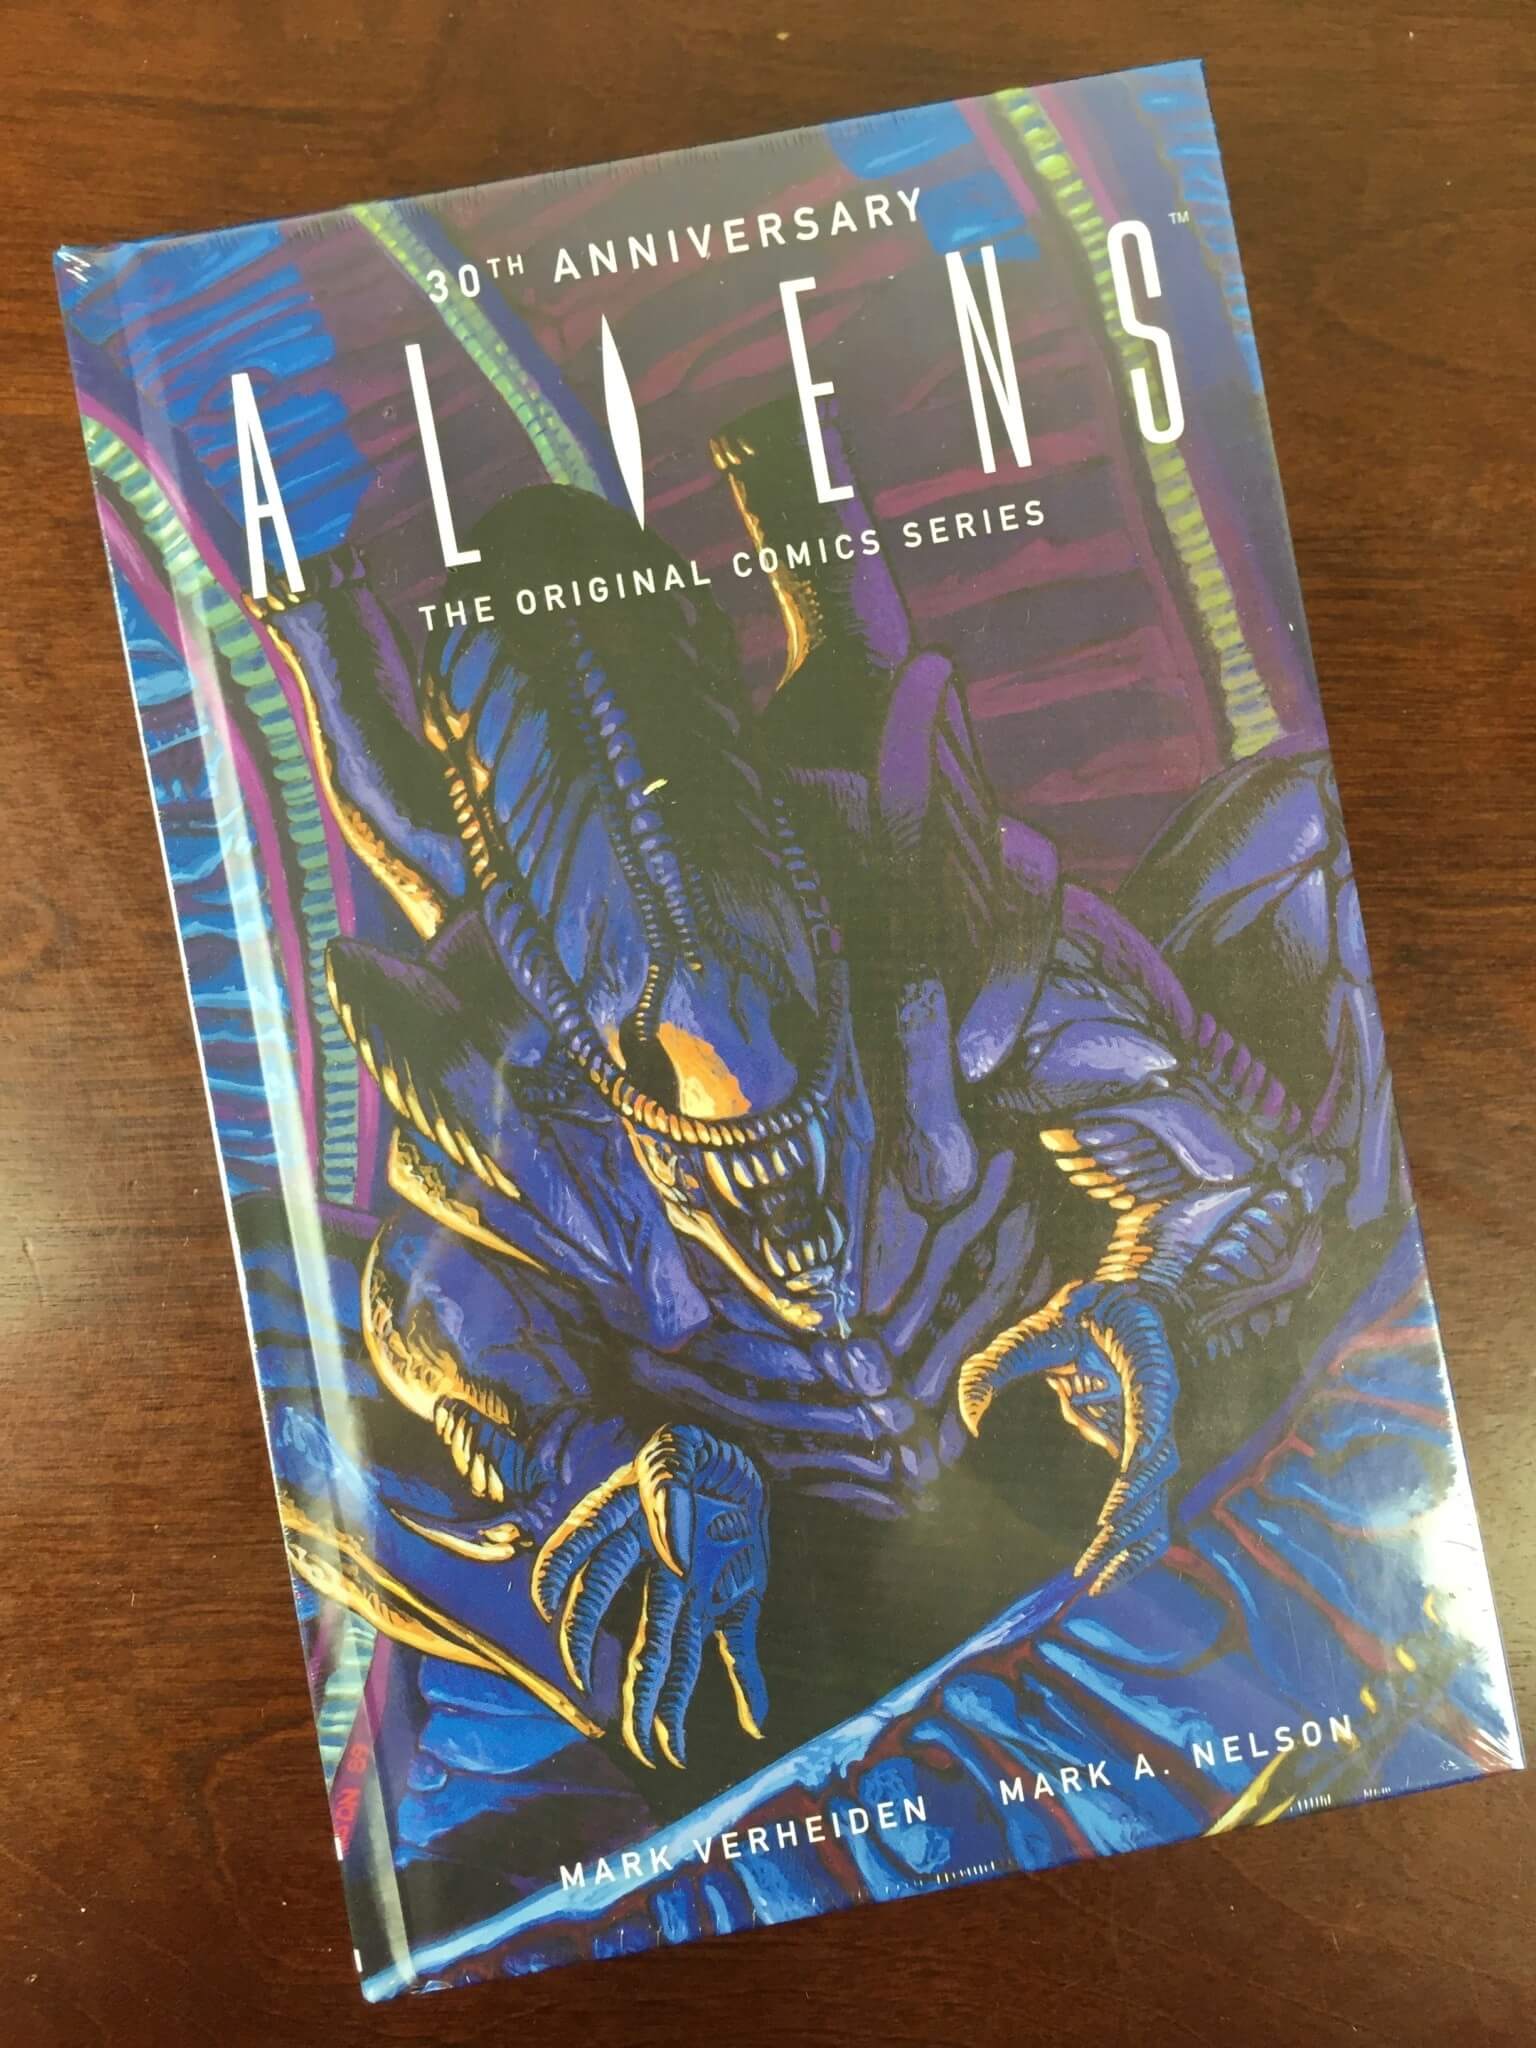 Loot Crate EXCLUSIVE 30th Anniversary Aliens Hardcover Book 